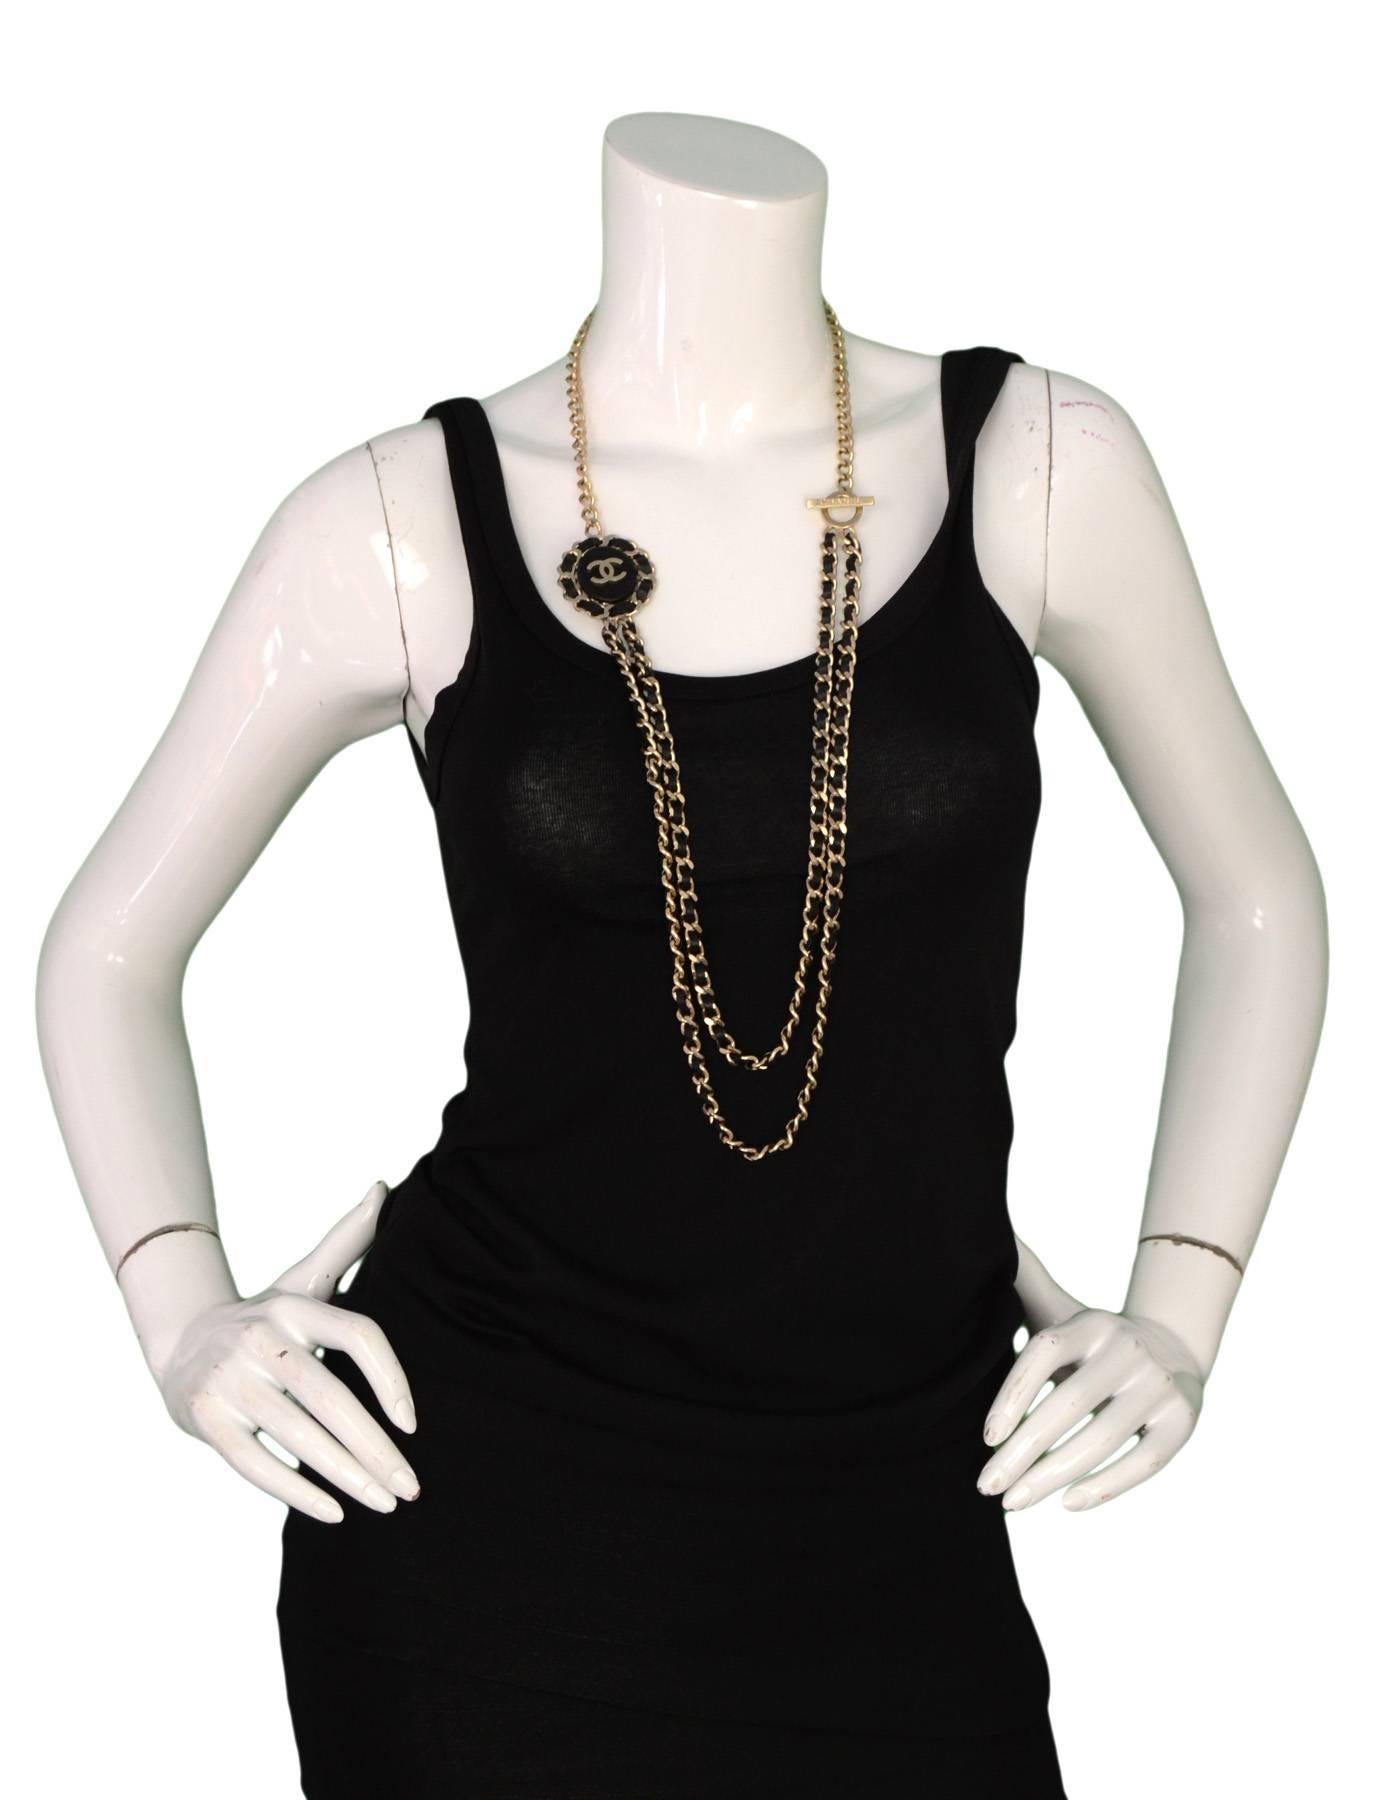 Chanel Goldtone and Black Leather Chain-Link Necklace
Can also be worn as a belt

MadeIn: Italy
Year of Production: 2016
Color: Goldtone and black
Stamped: Chanel B16 CC B Made In Italy
Materials: Metal and leather
Closure/opening: Hook and